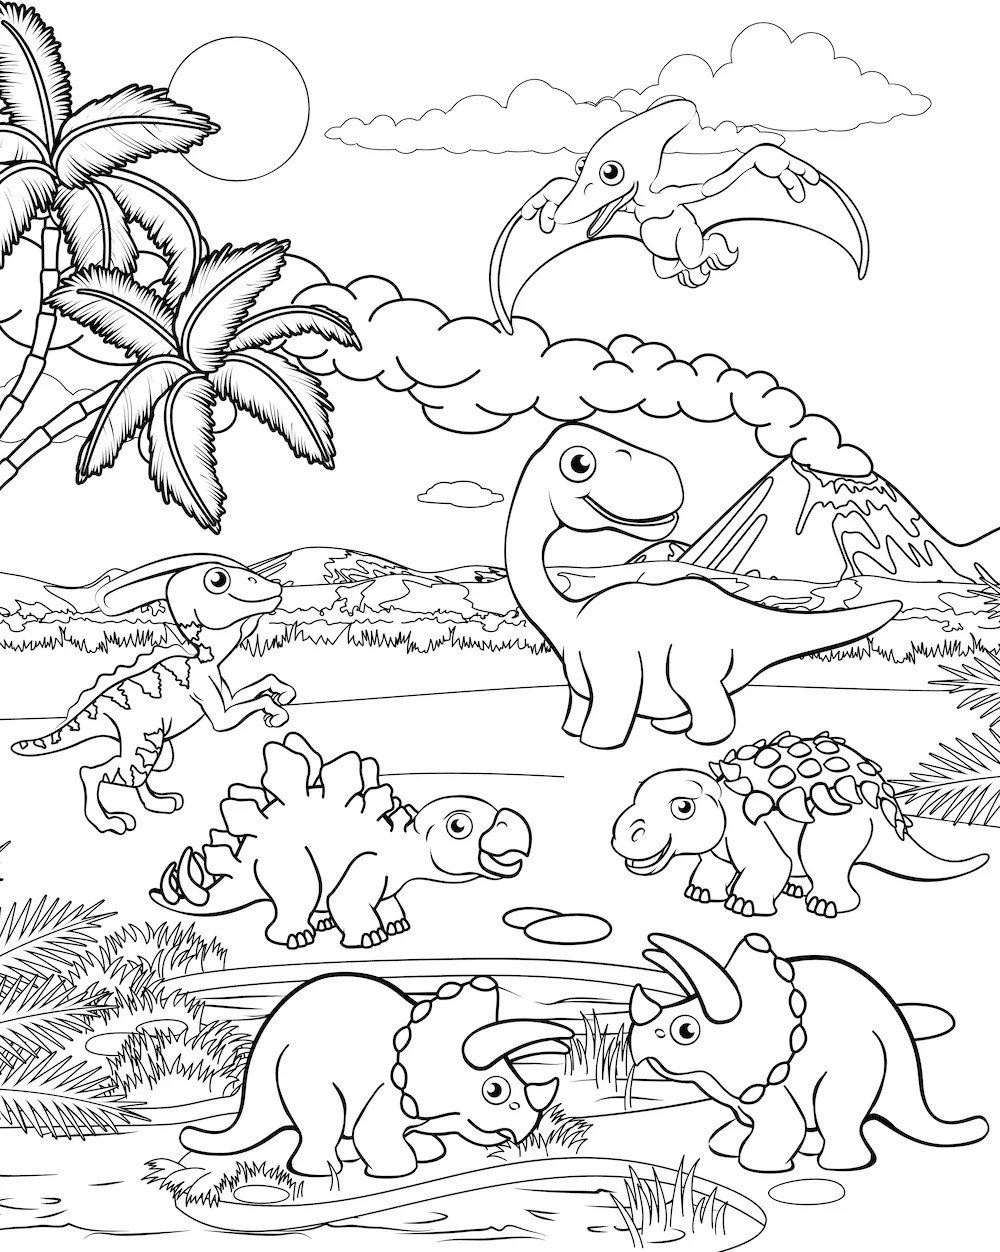 Free Dinosaur Coloring Pages to Download (PDF) VerbNow